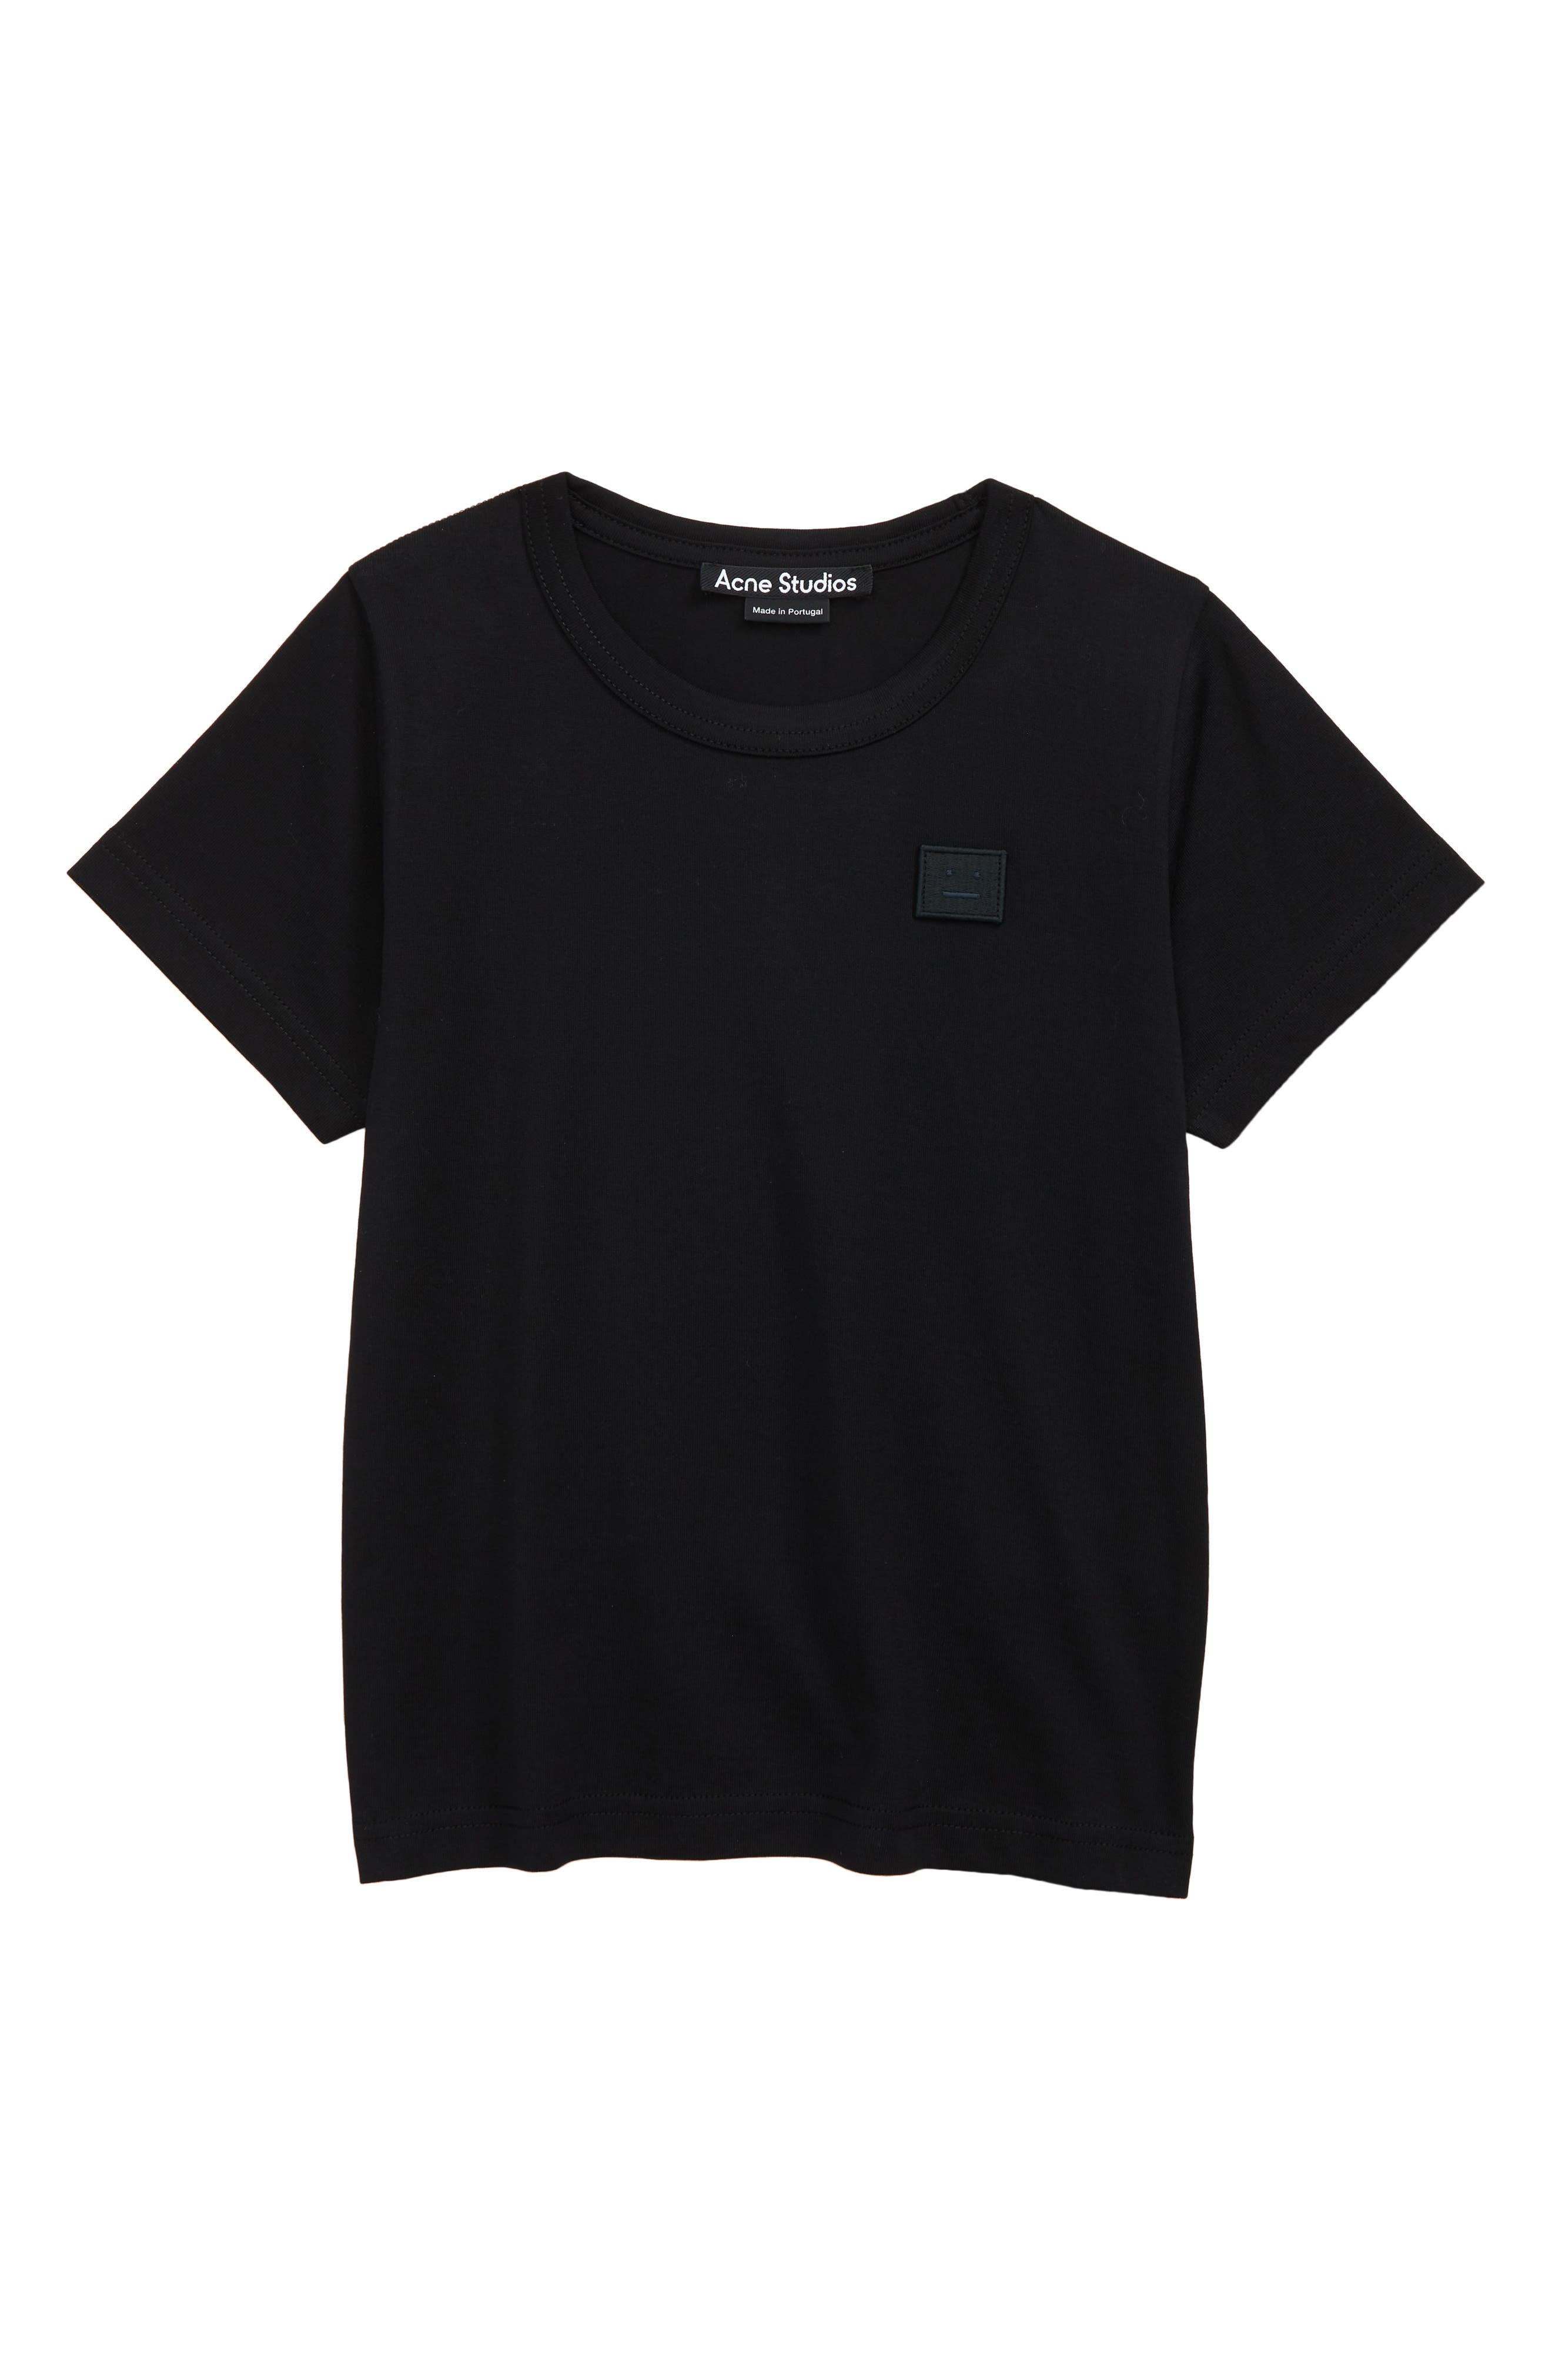 Acne Studios Kids' Mini Nash Face Patch T-Shirt in Black at Nordstrom, Size 4-6Y Us